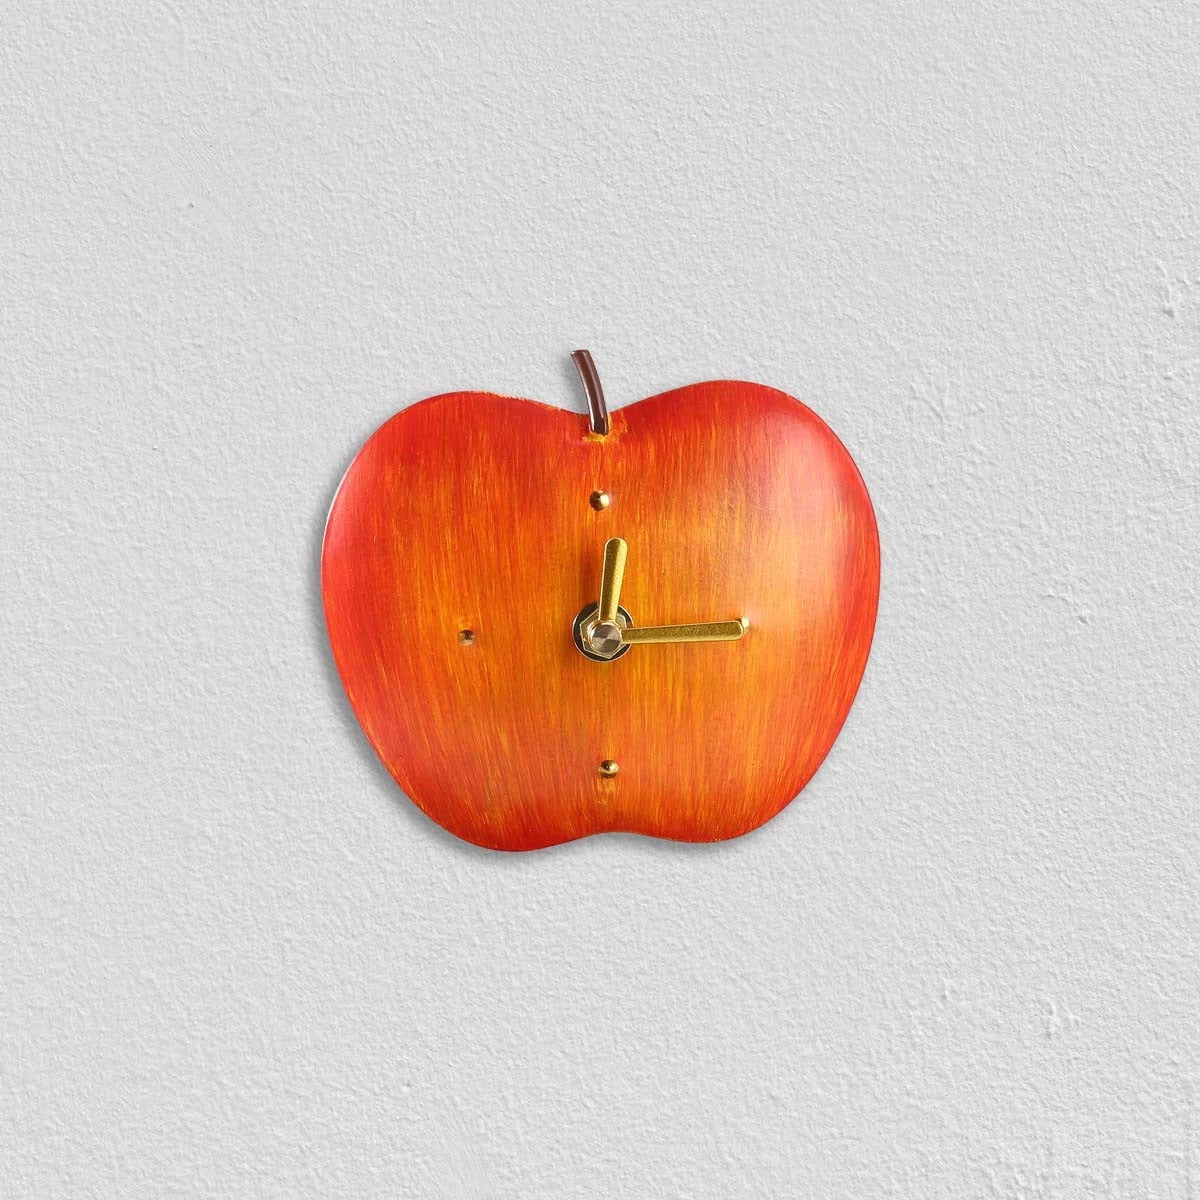 Apple Kitchen Decor with Vintage and Retro Analog Apple Clock Ornaments and Figurines